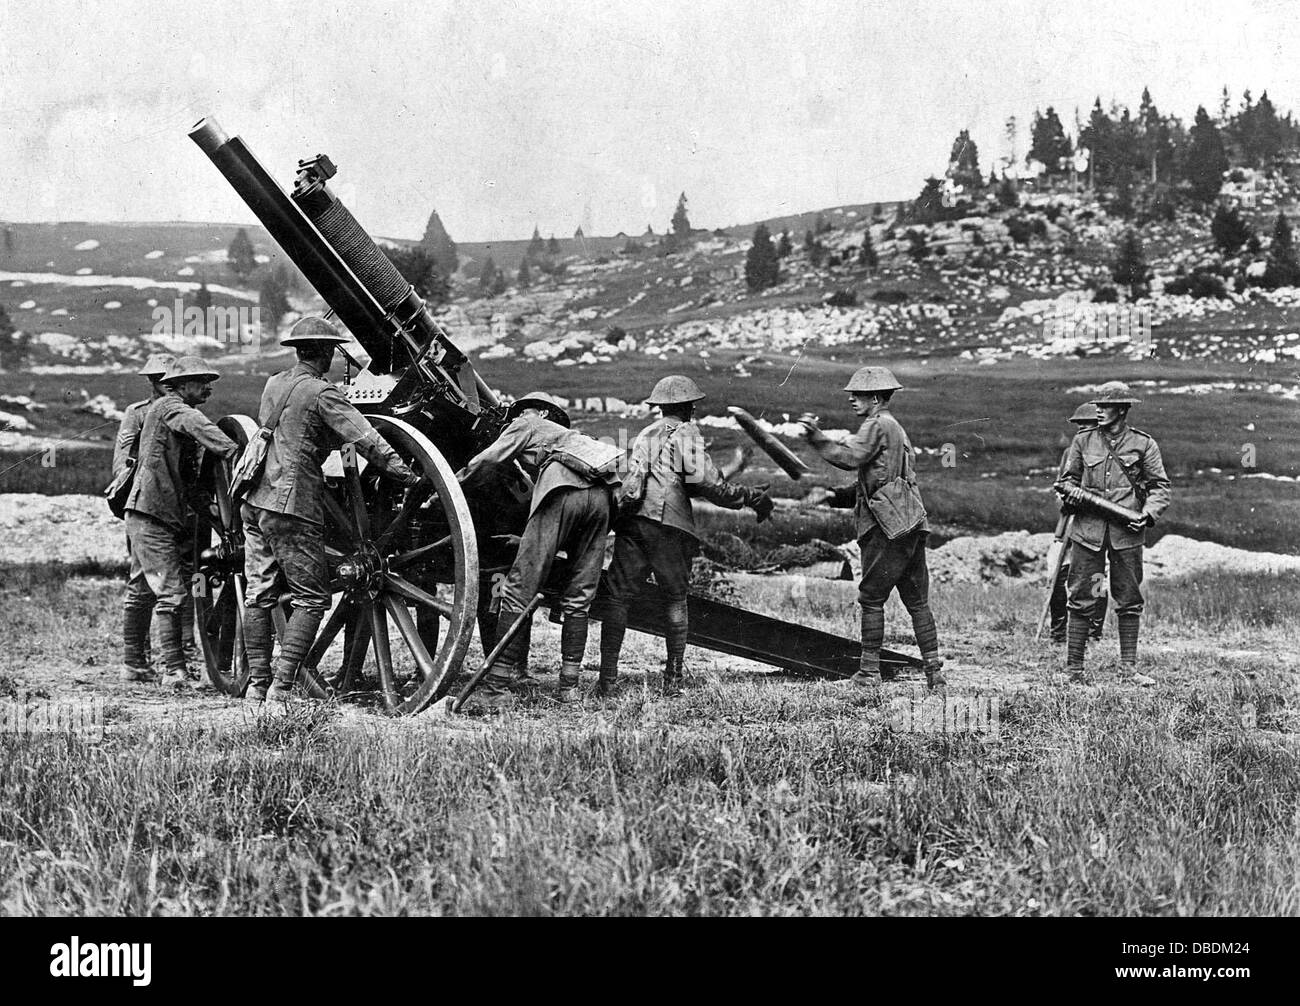 Ww1 Cannon High Resolution Stock Photography and Images - Alamy